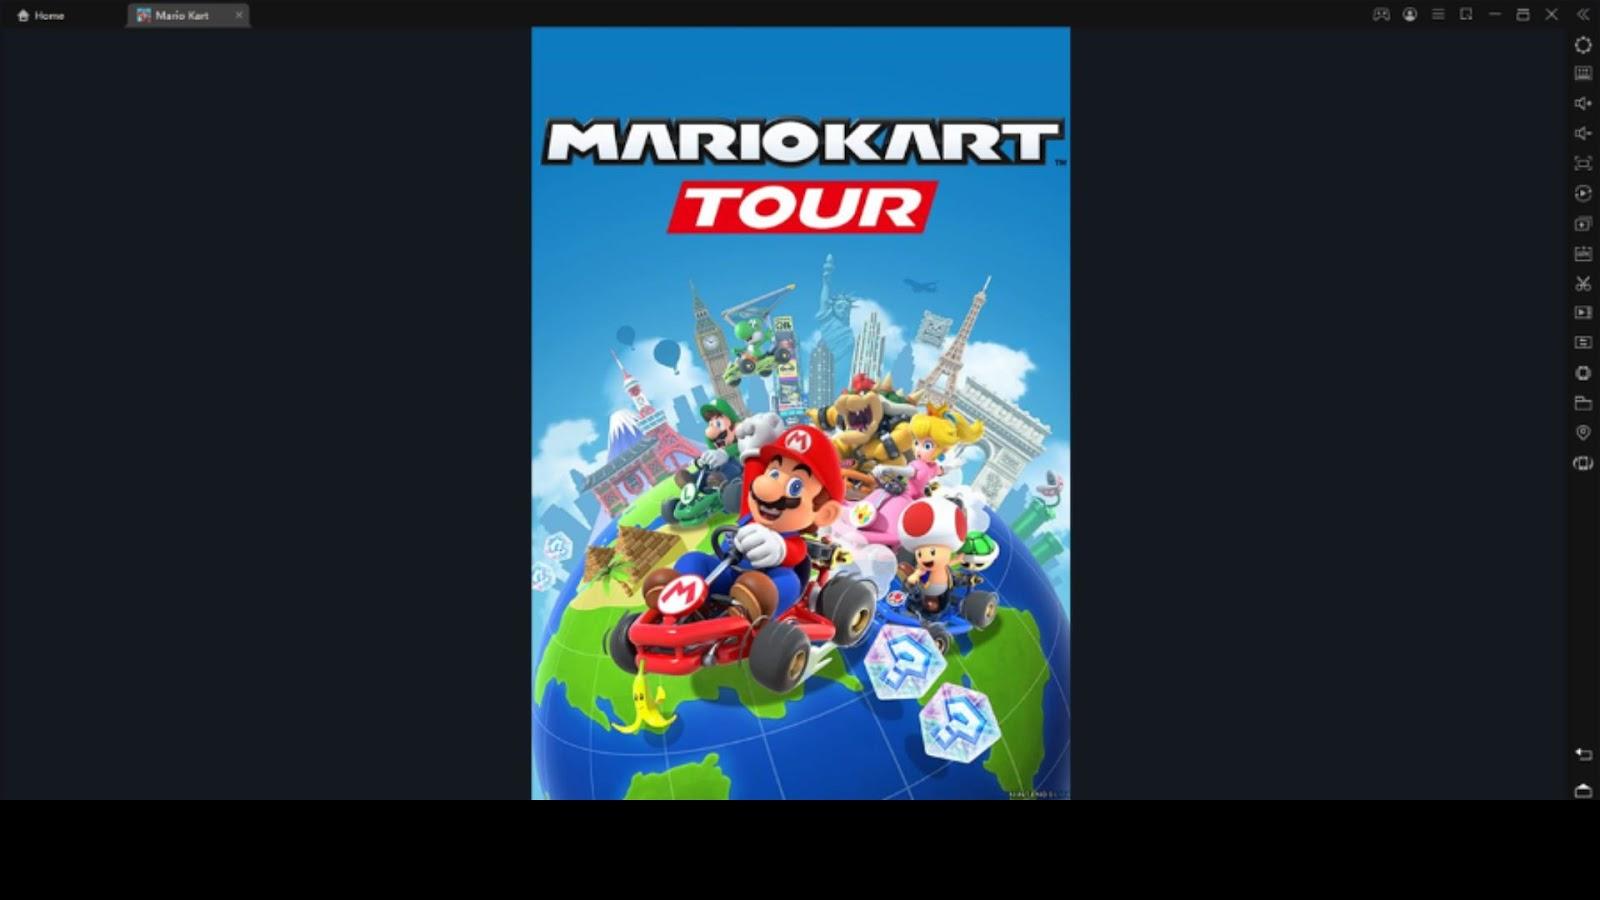 Mario Kart Tour Characters List - All Available Drivers, Karts, and Gliders